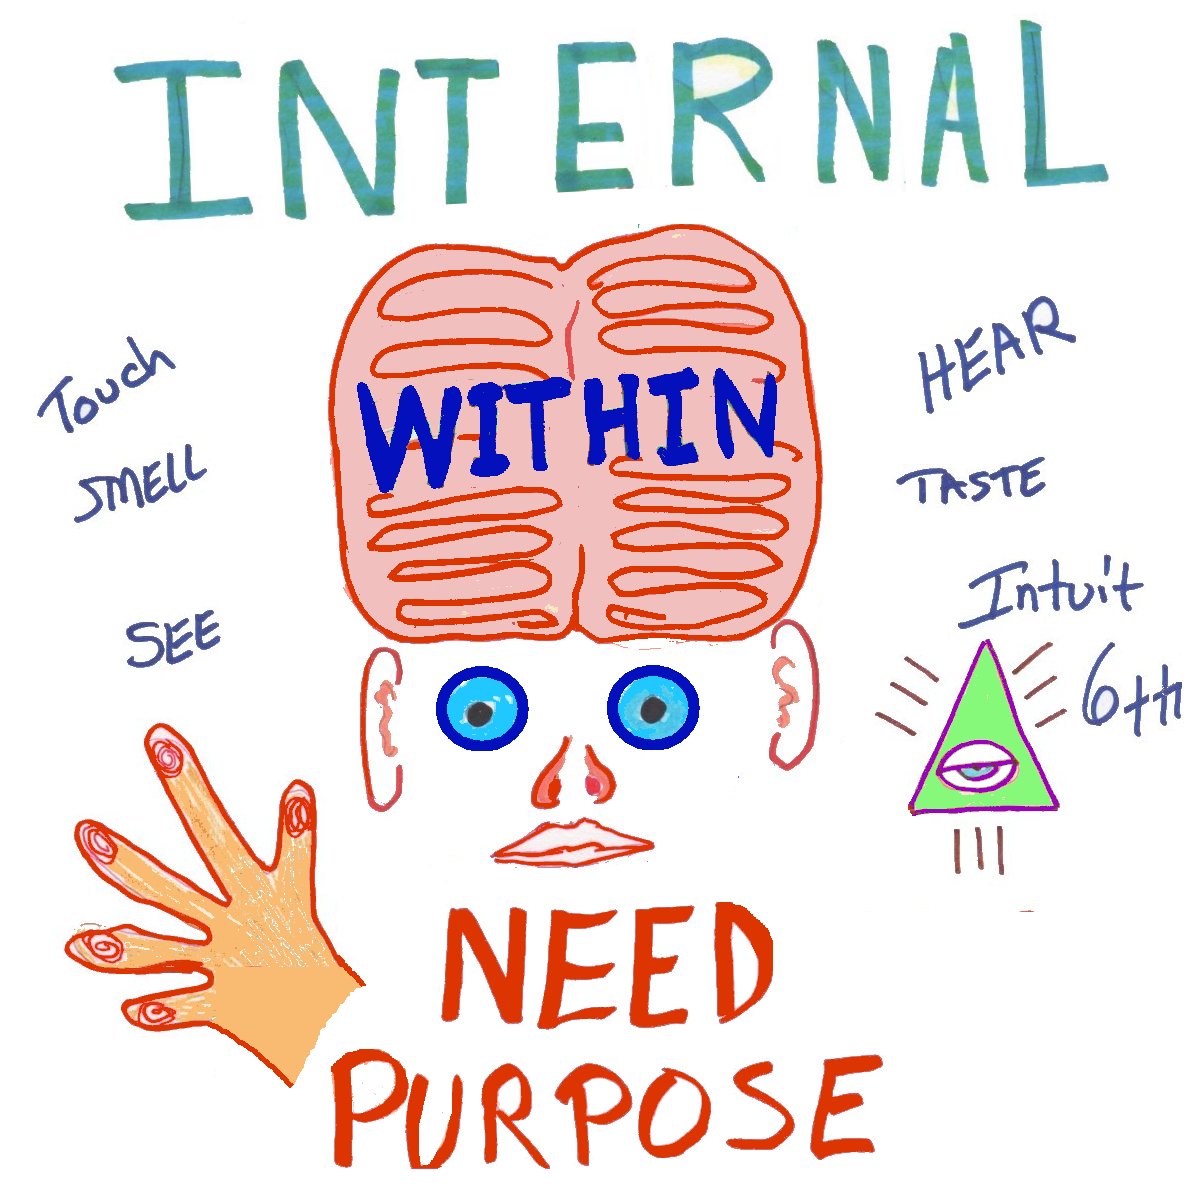 what we know, feel and intuit